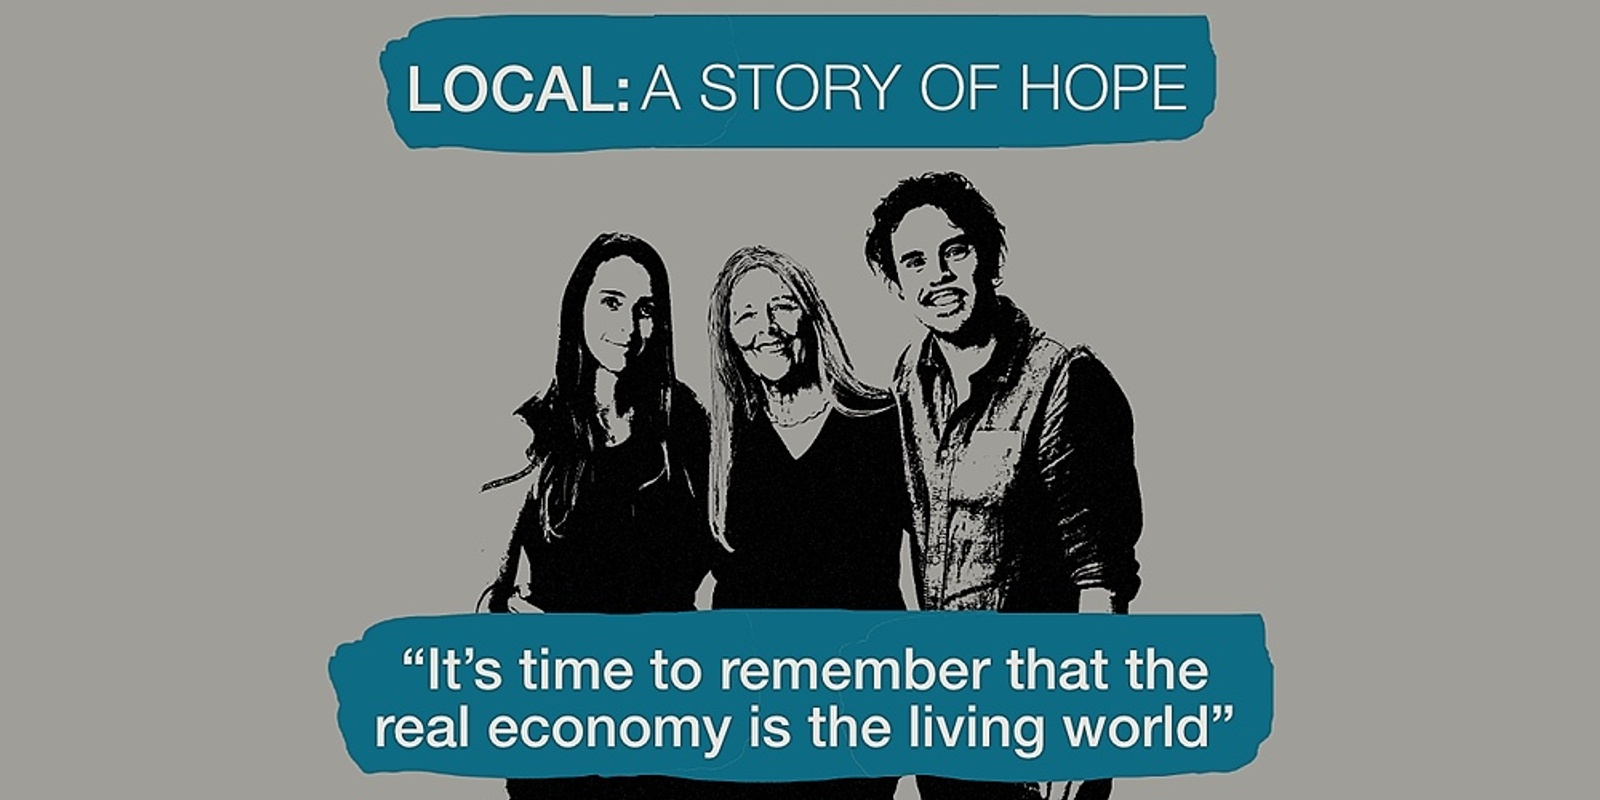 Banner image for LOCAL: A Story of Hope film launch with Damon Gameau, Ella Noah Bancroft, Helena Norberg-Hodge, and Satish Kumar